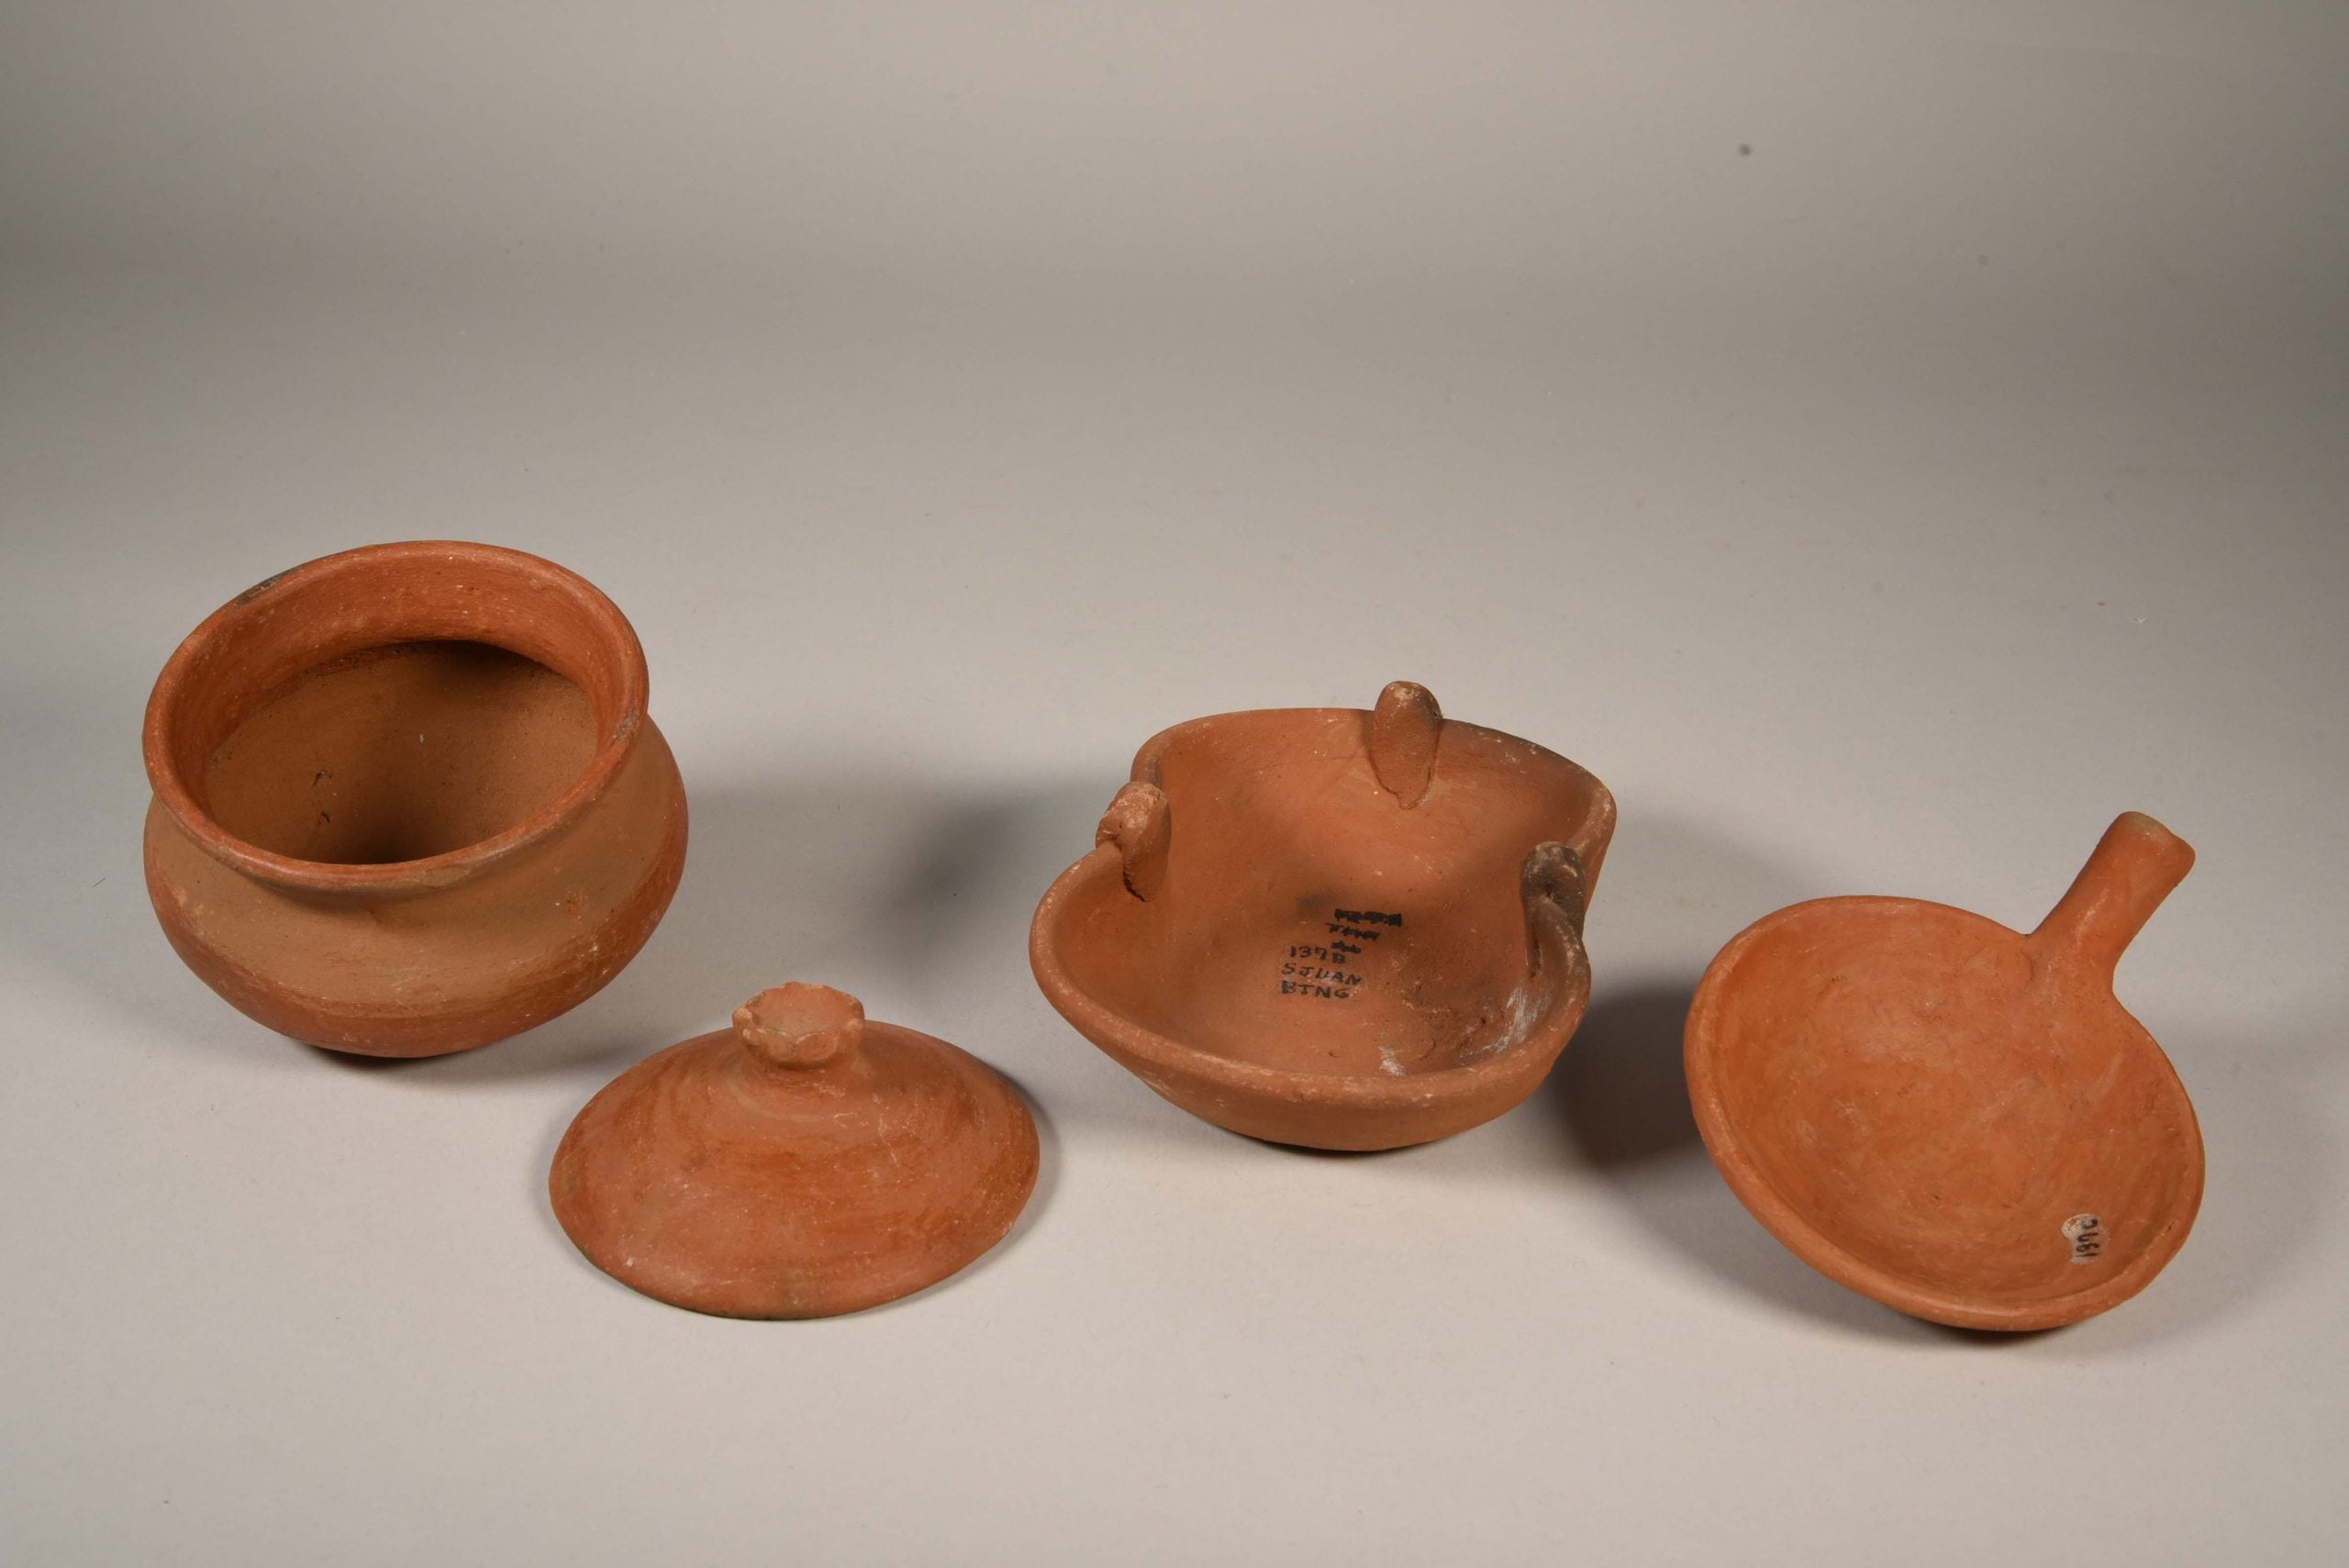 A ceramic pot, pot lid, stove, and frying pan sitting next to each other.